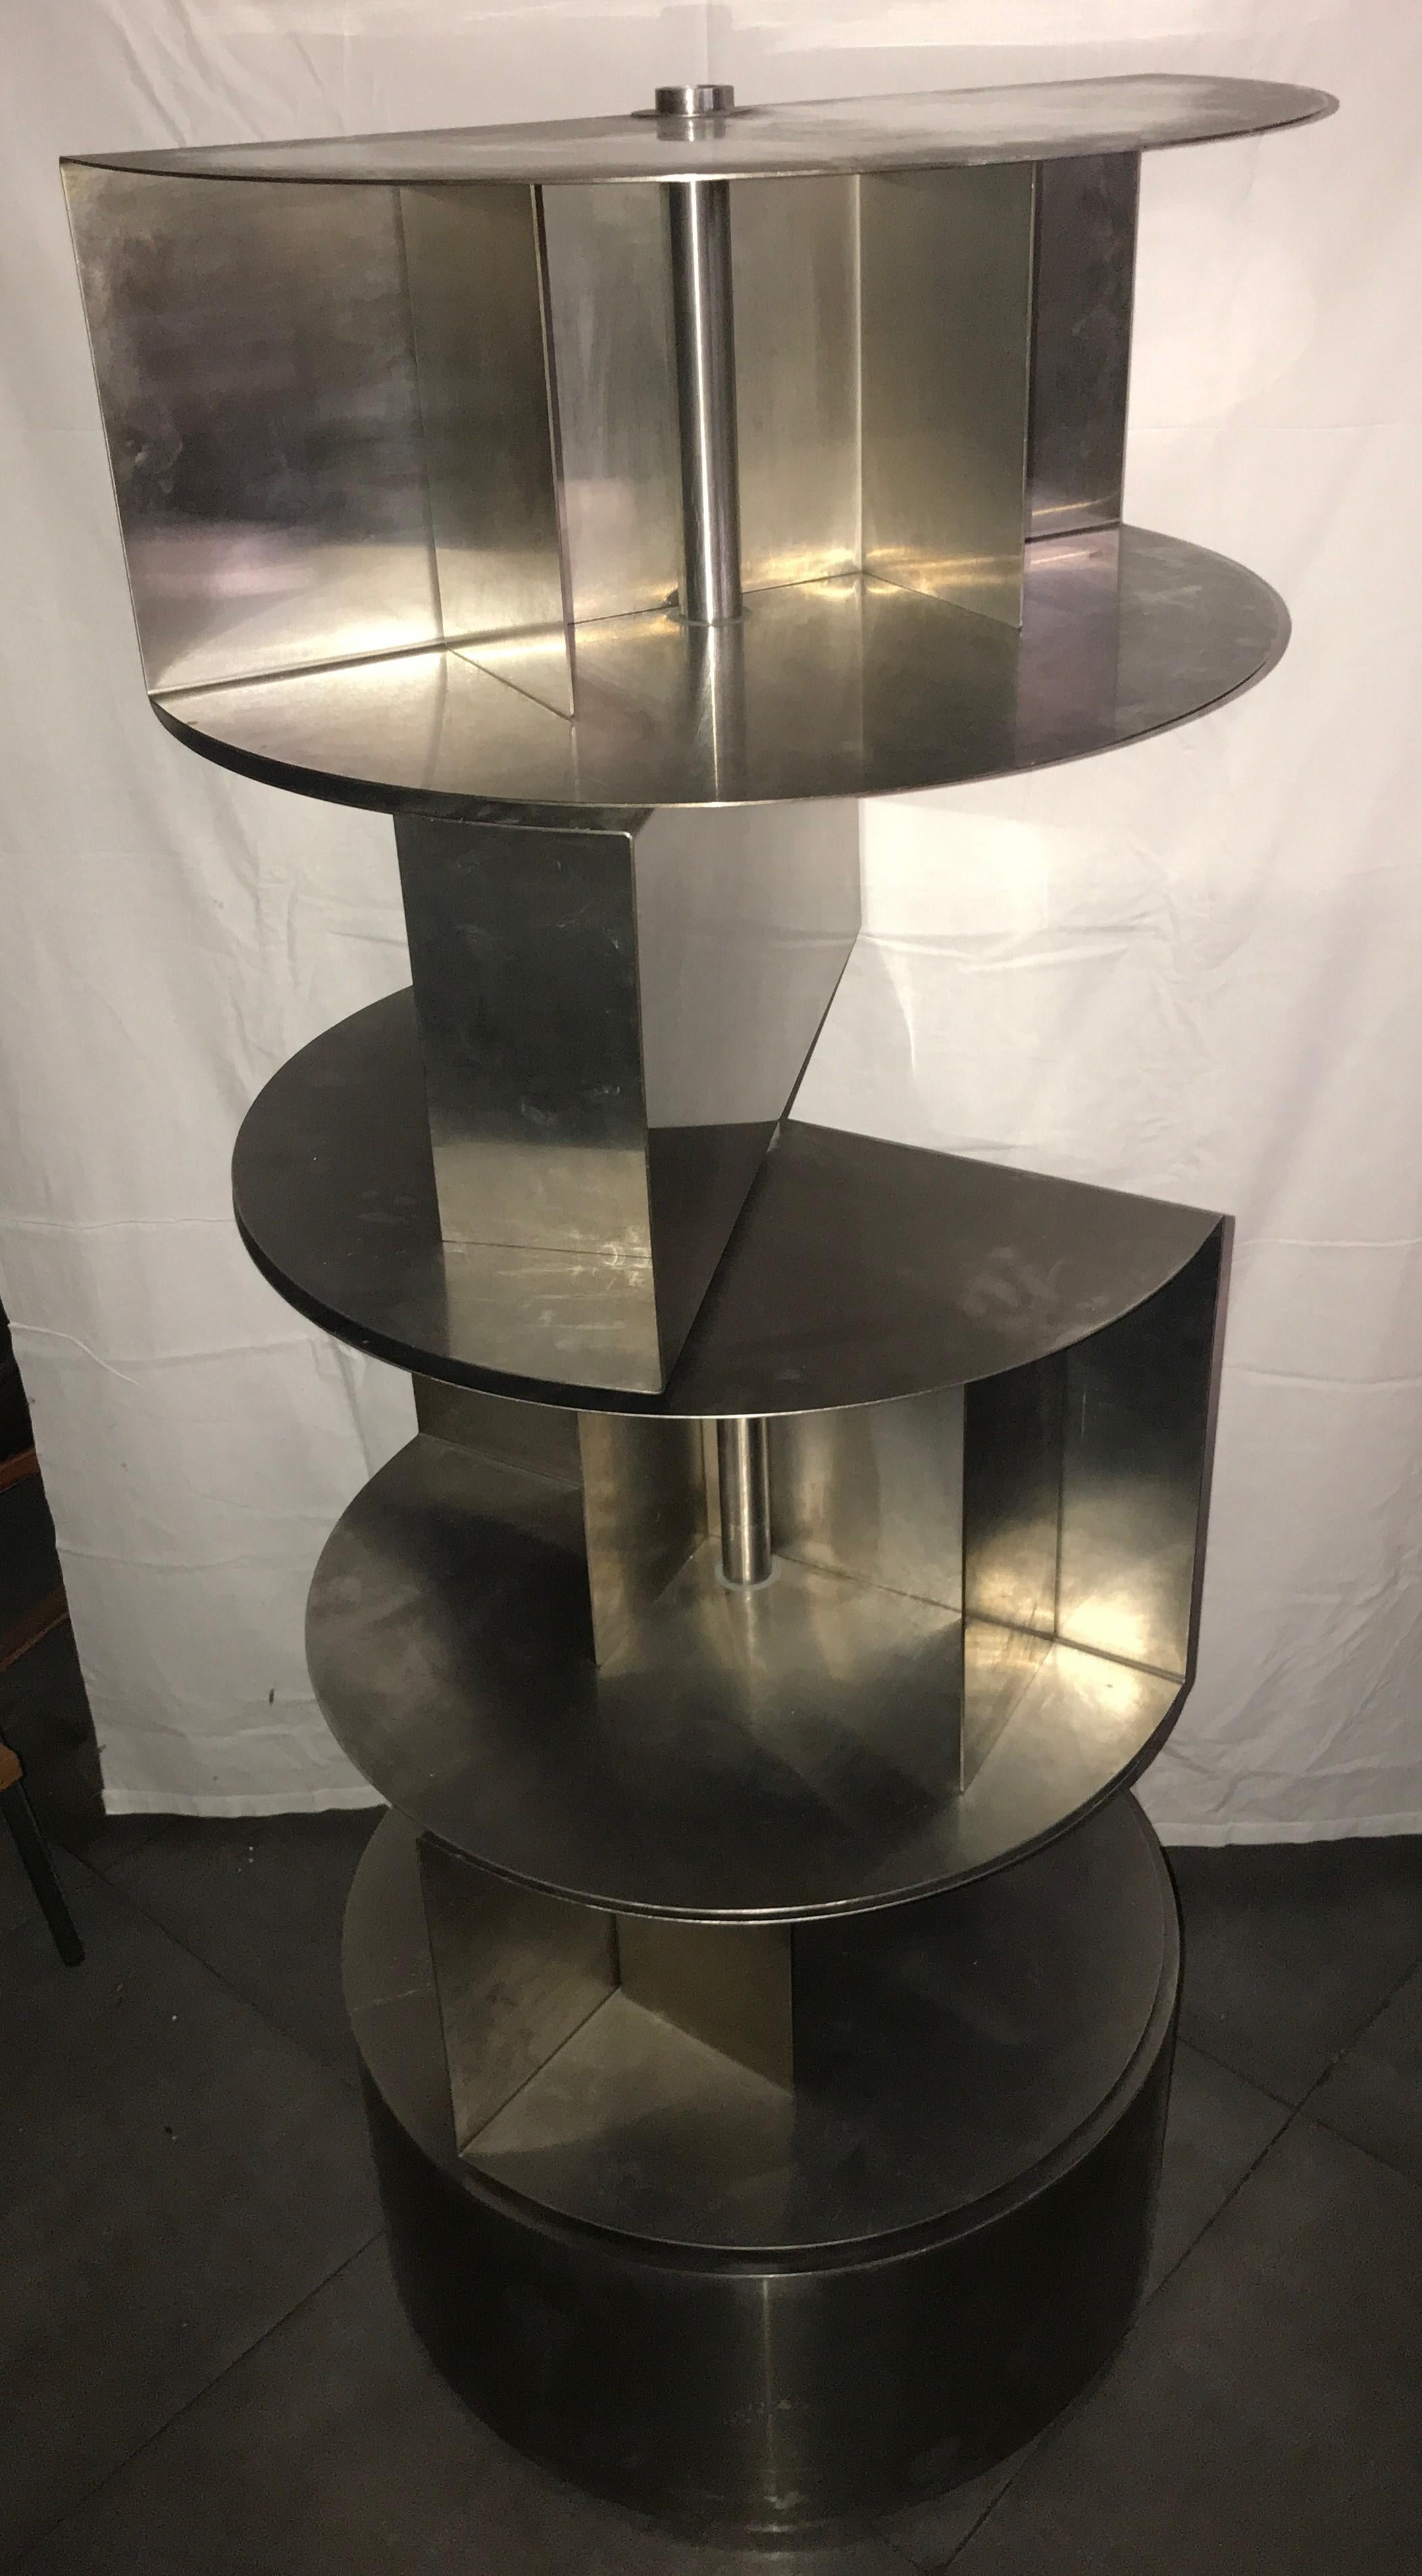 Stunning cylindrical metal cabinet with 3 rotating shelves designed by Michel Boyer in France in 1970s.
A very ingenious system that allows to change the positions of the shelves and to have a new furniture very useful.
In very good condition, a